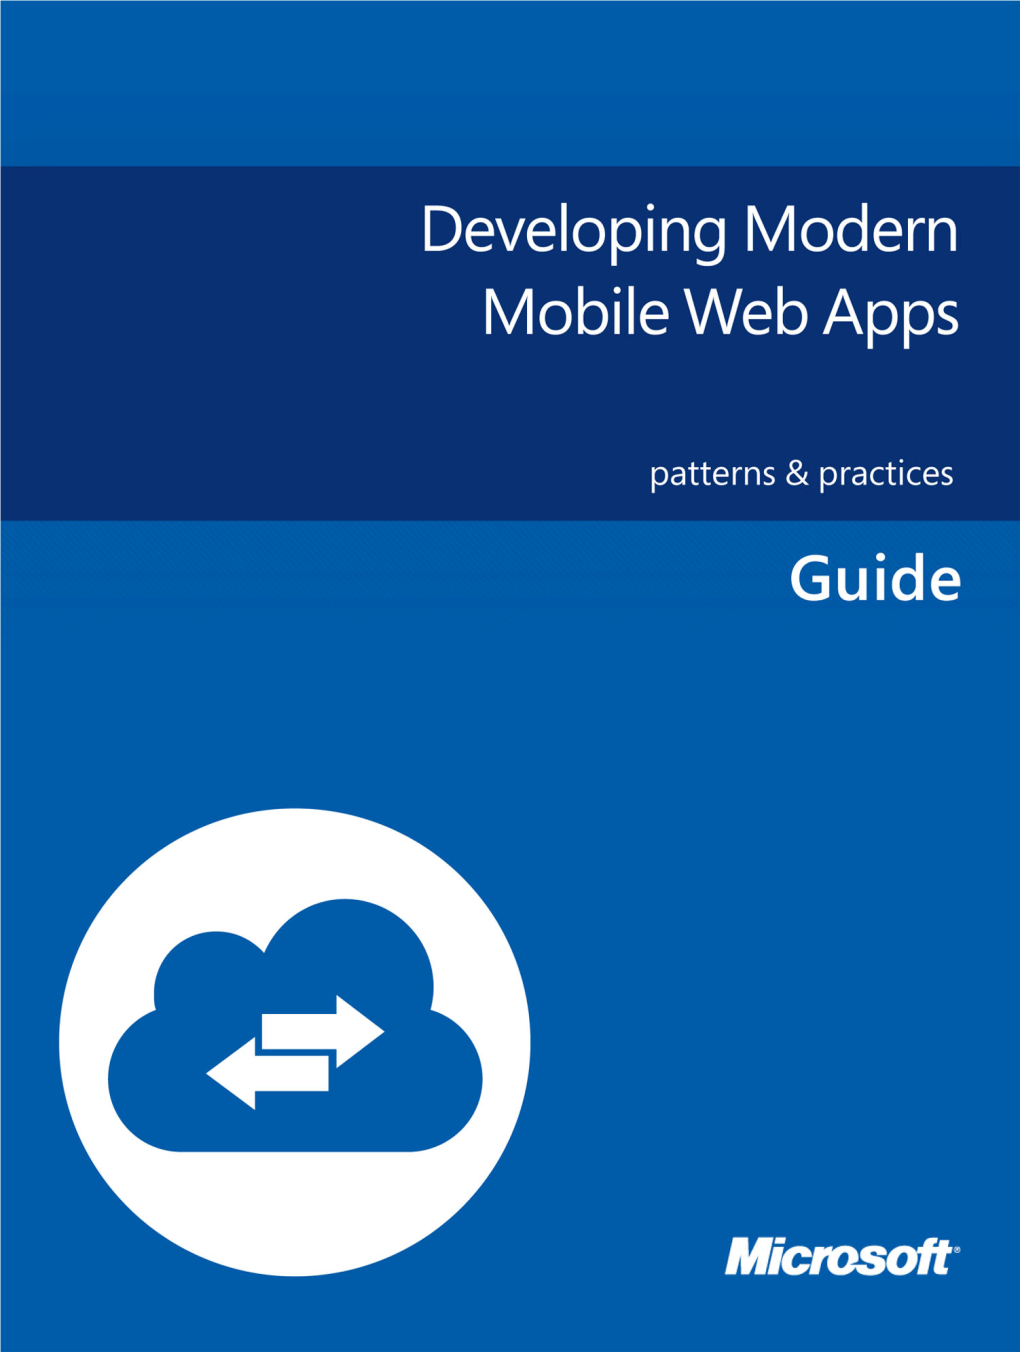 Developing Modern Mobile Web Apps Patterns & Practices